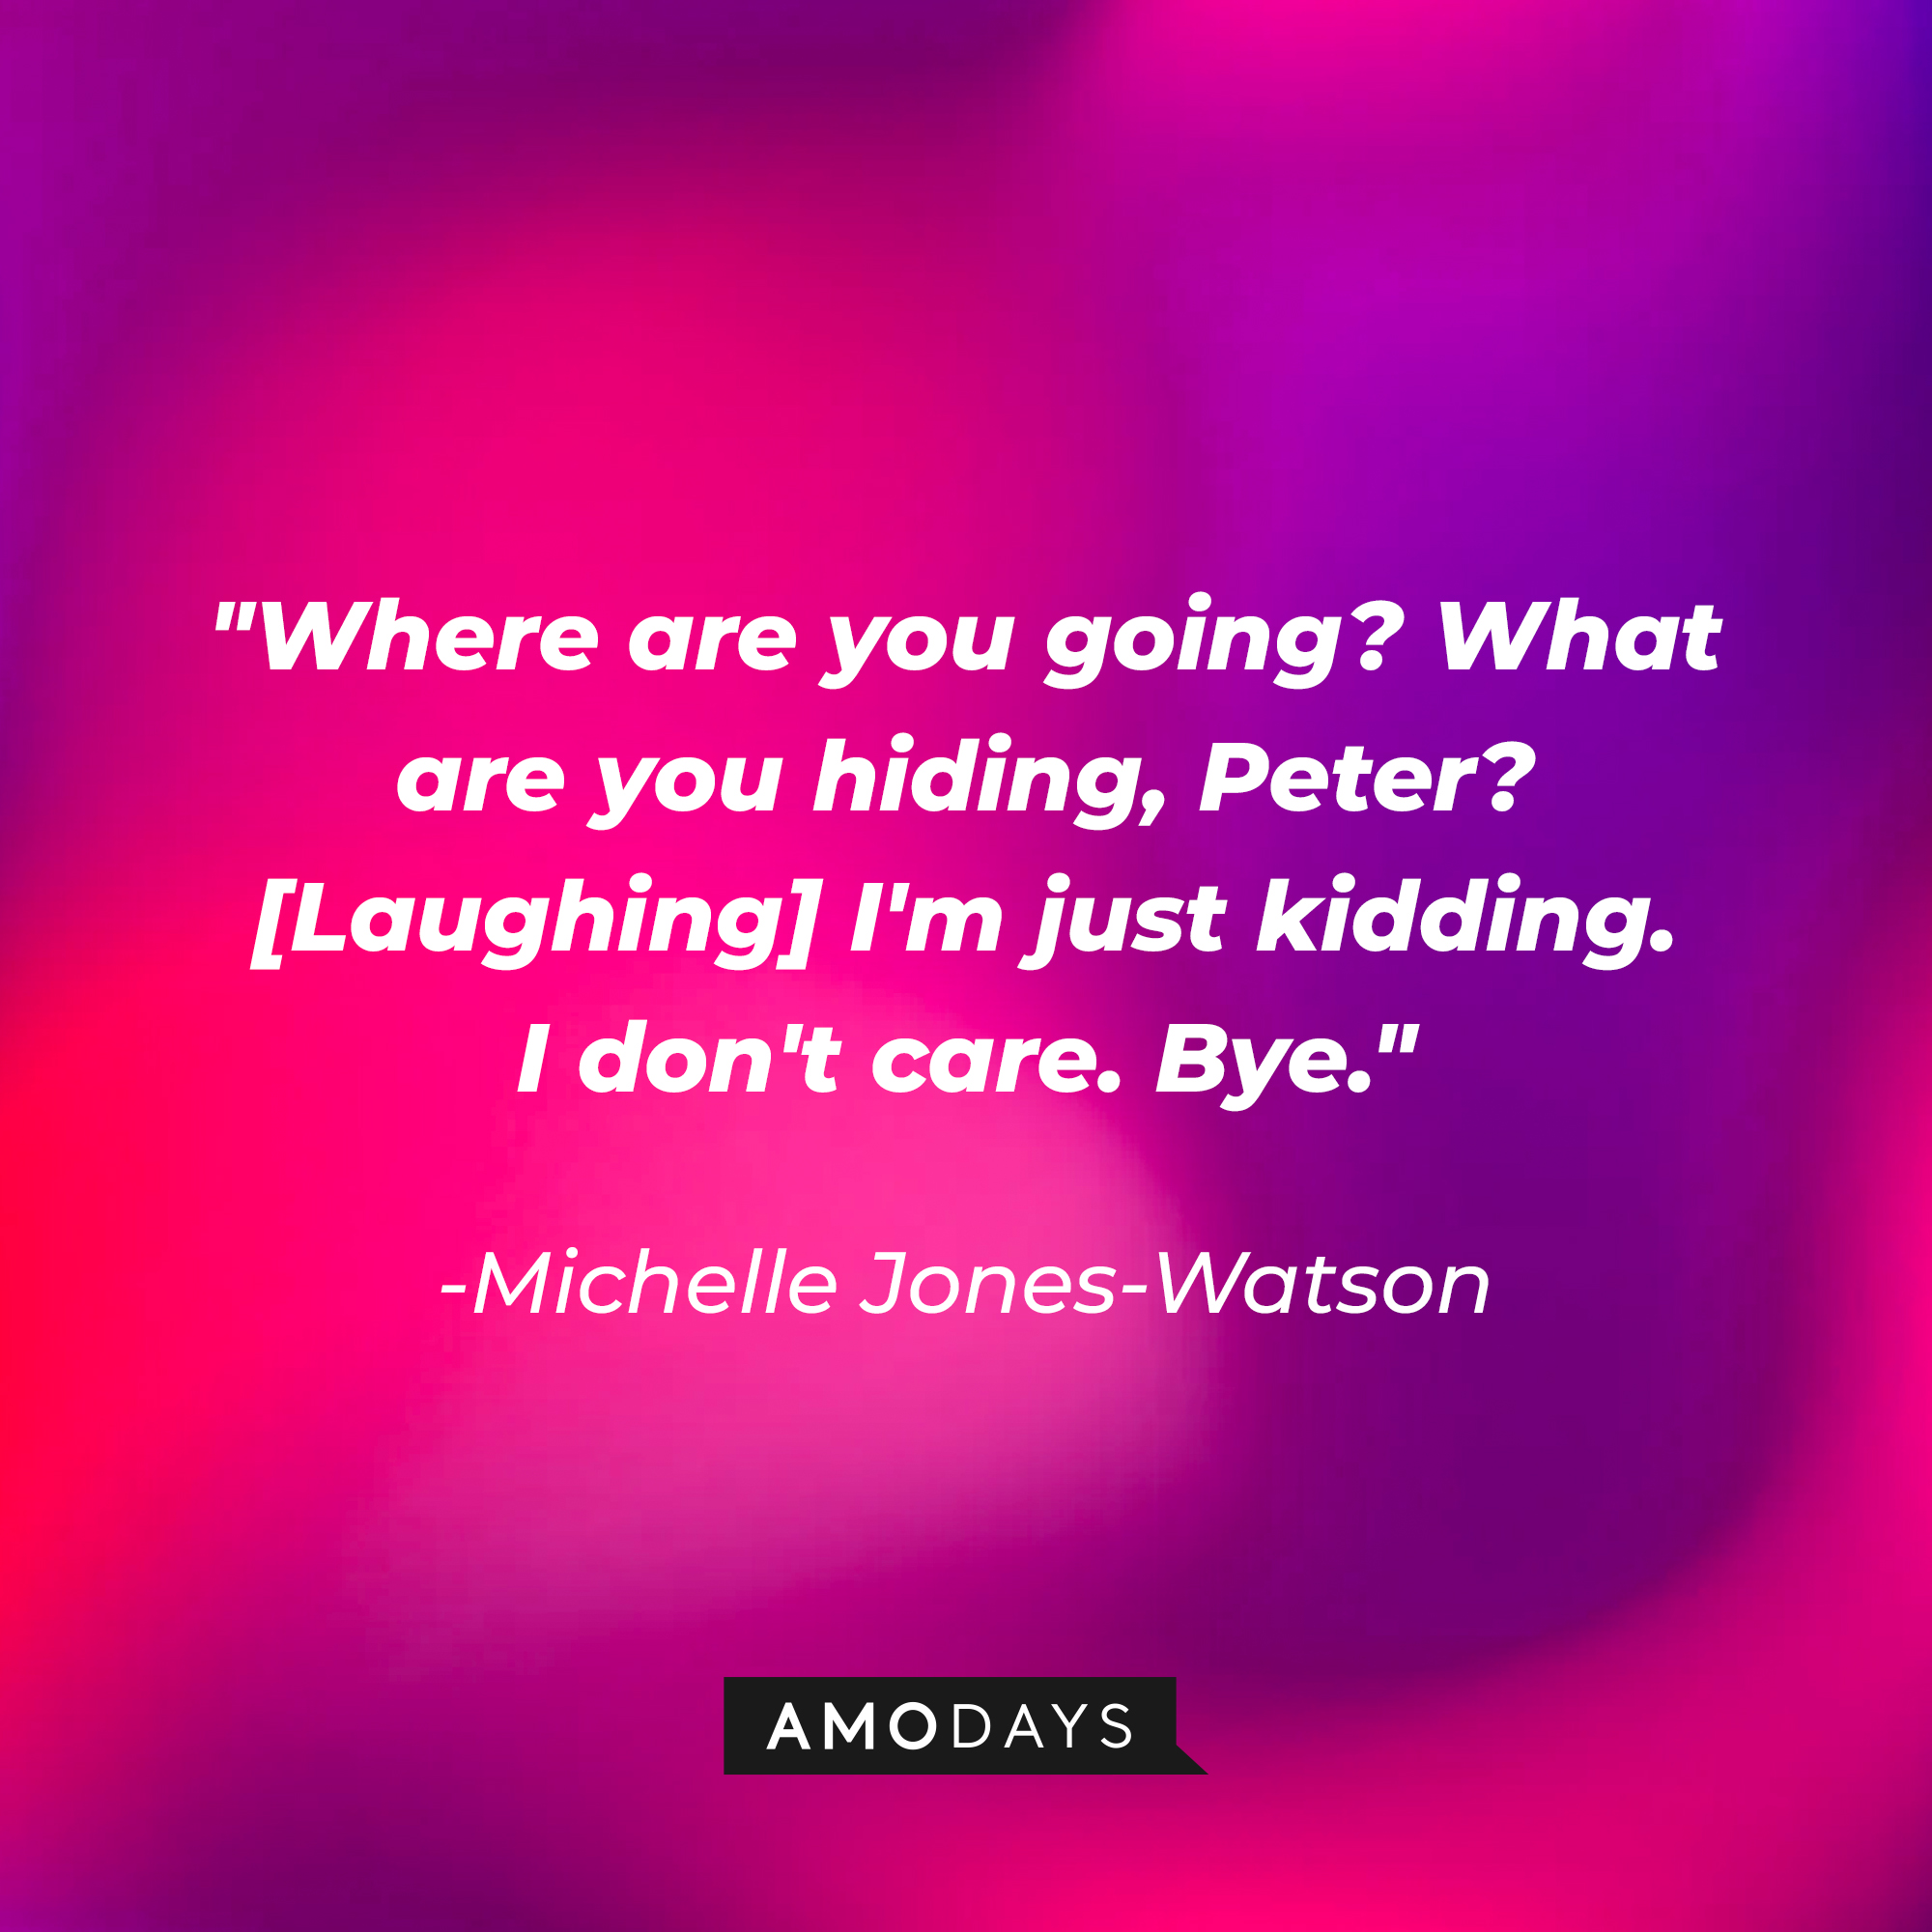 Michelle Jones-Watson’s quote: Where are you going? What are you hiding, Peter? [Laughing] I'm just kidding. I don't care. Bye. | Image AmoDays